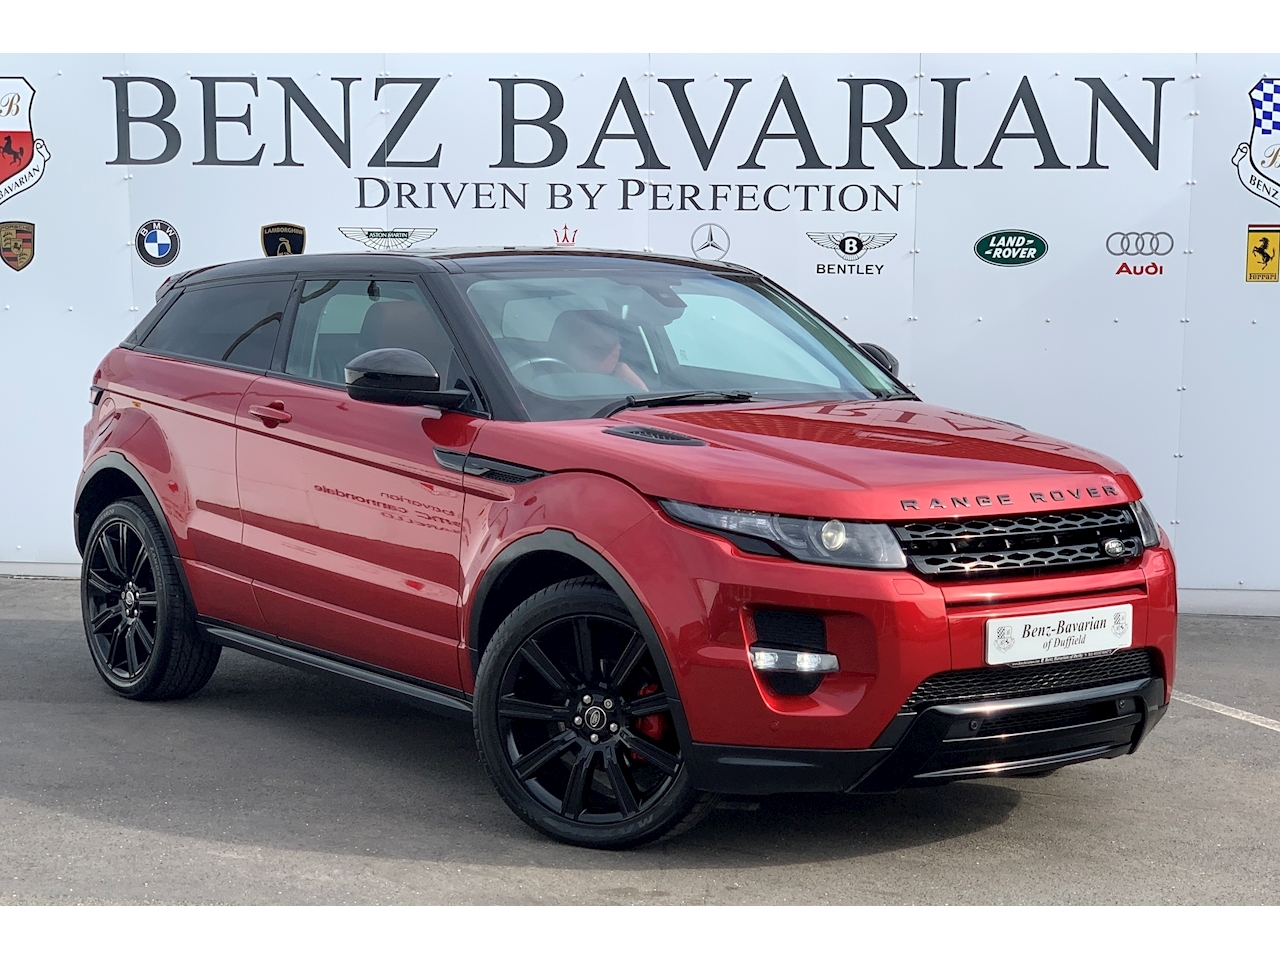 Range Rover Evoque 2.2 SD4 Dynamic Coupe 3dr Diesel Automatic 4X4 (153 g/km, 190 bhp)